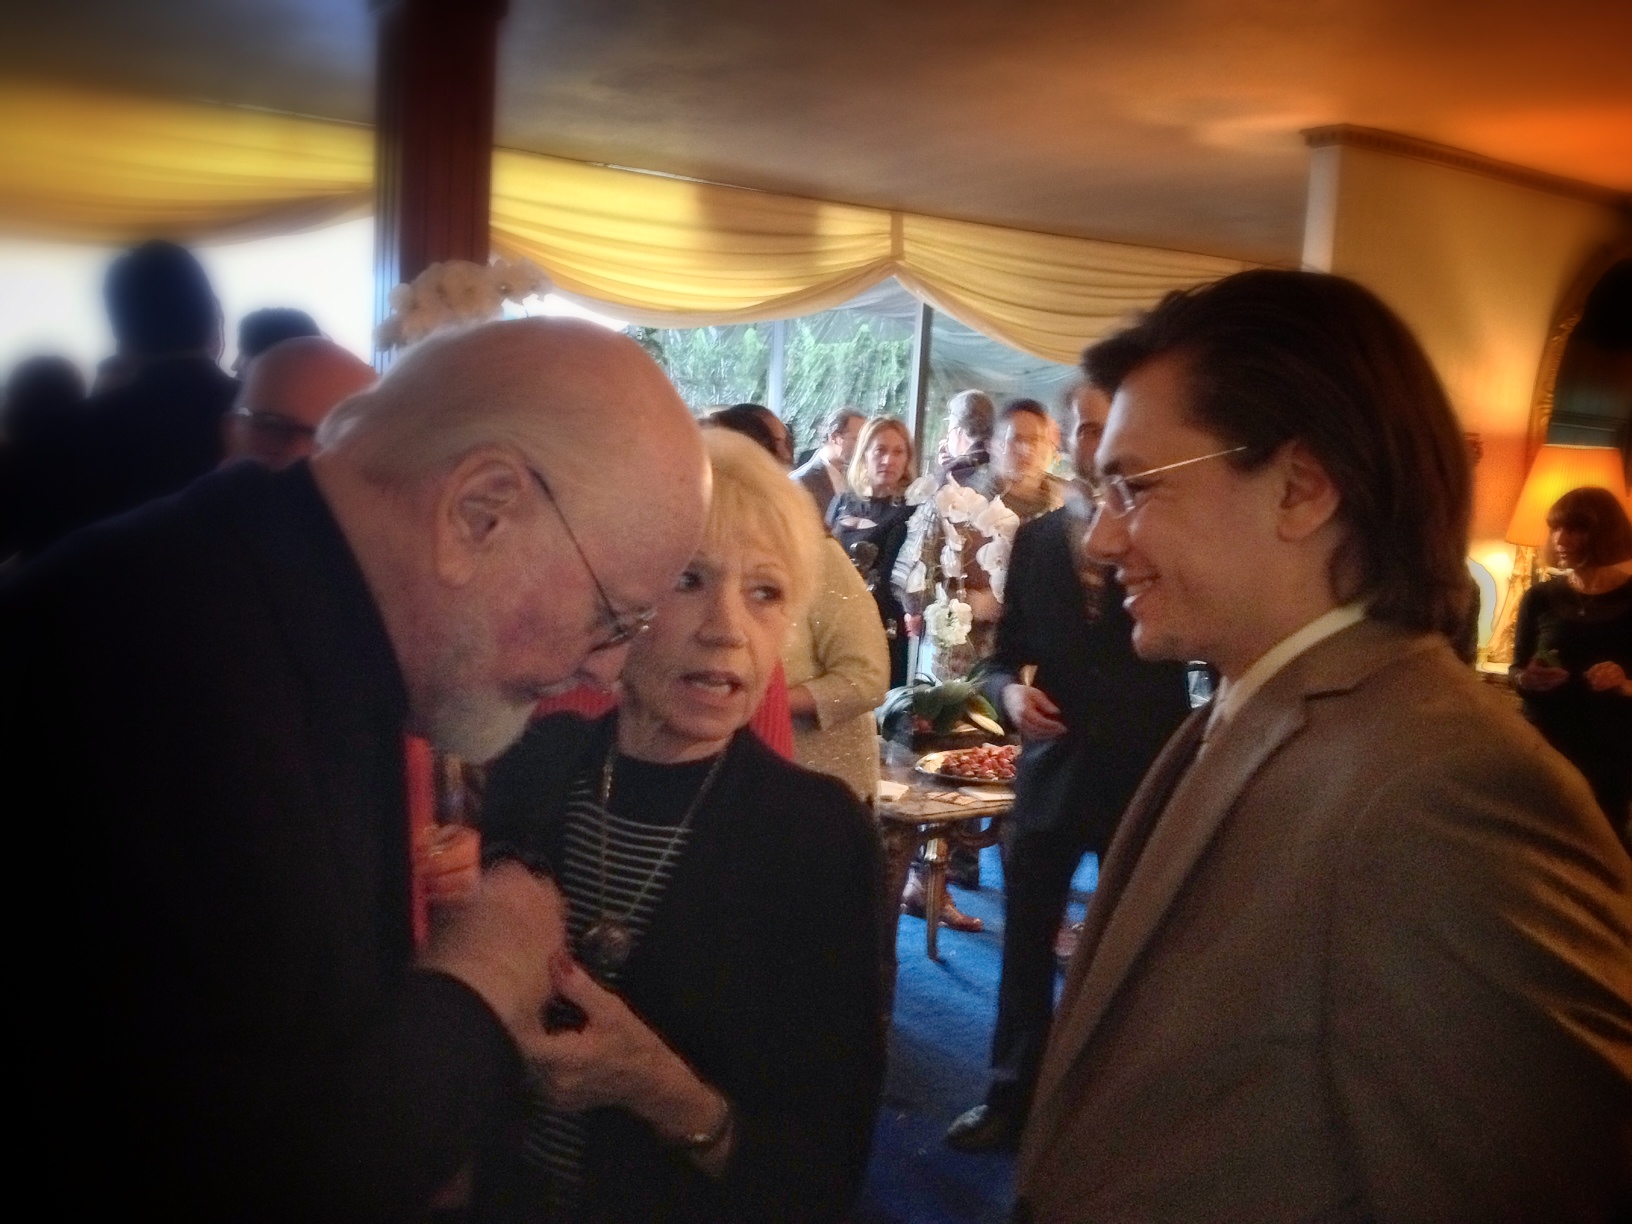 Charles-Henri Avelange with composer John Williams, gracefully accepting compliments on his 49 Oscar Nominations.